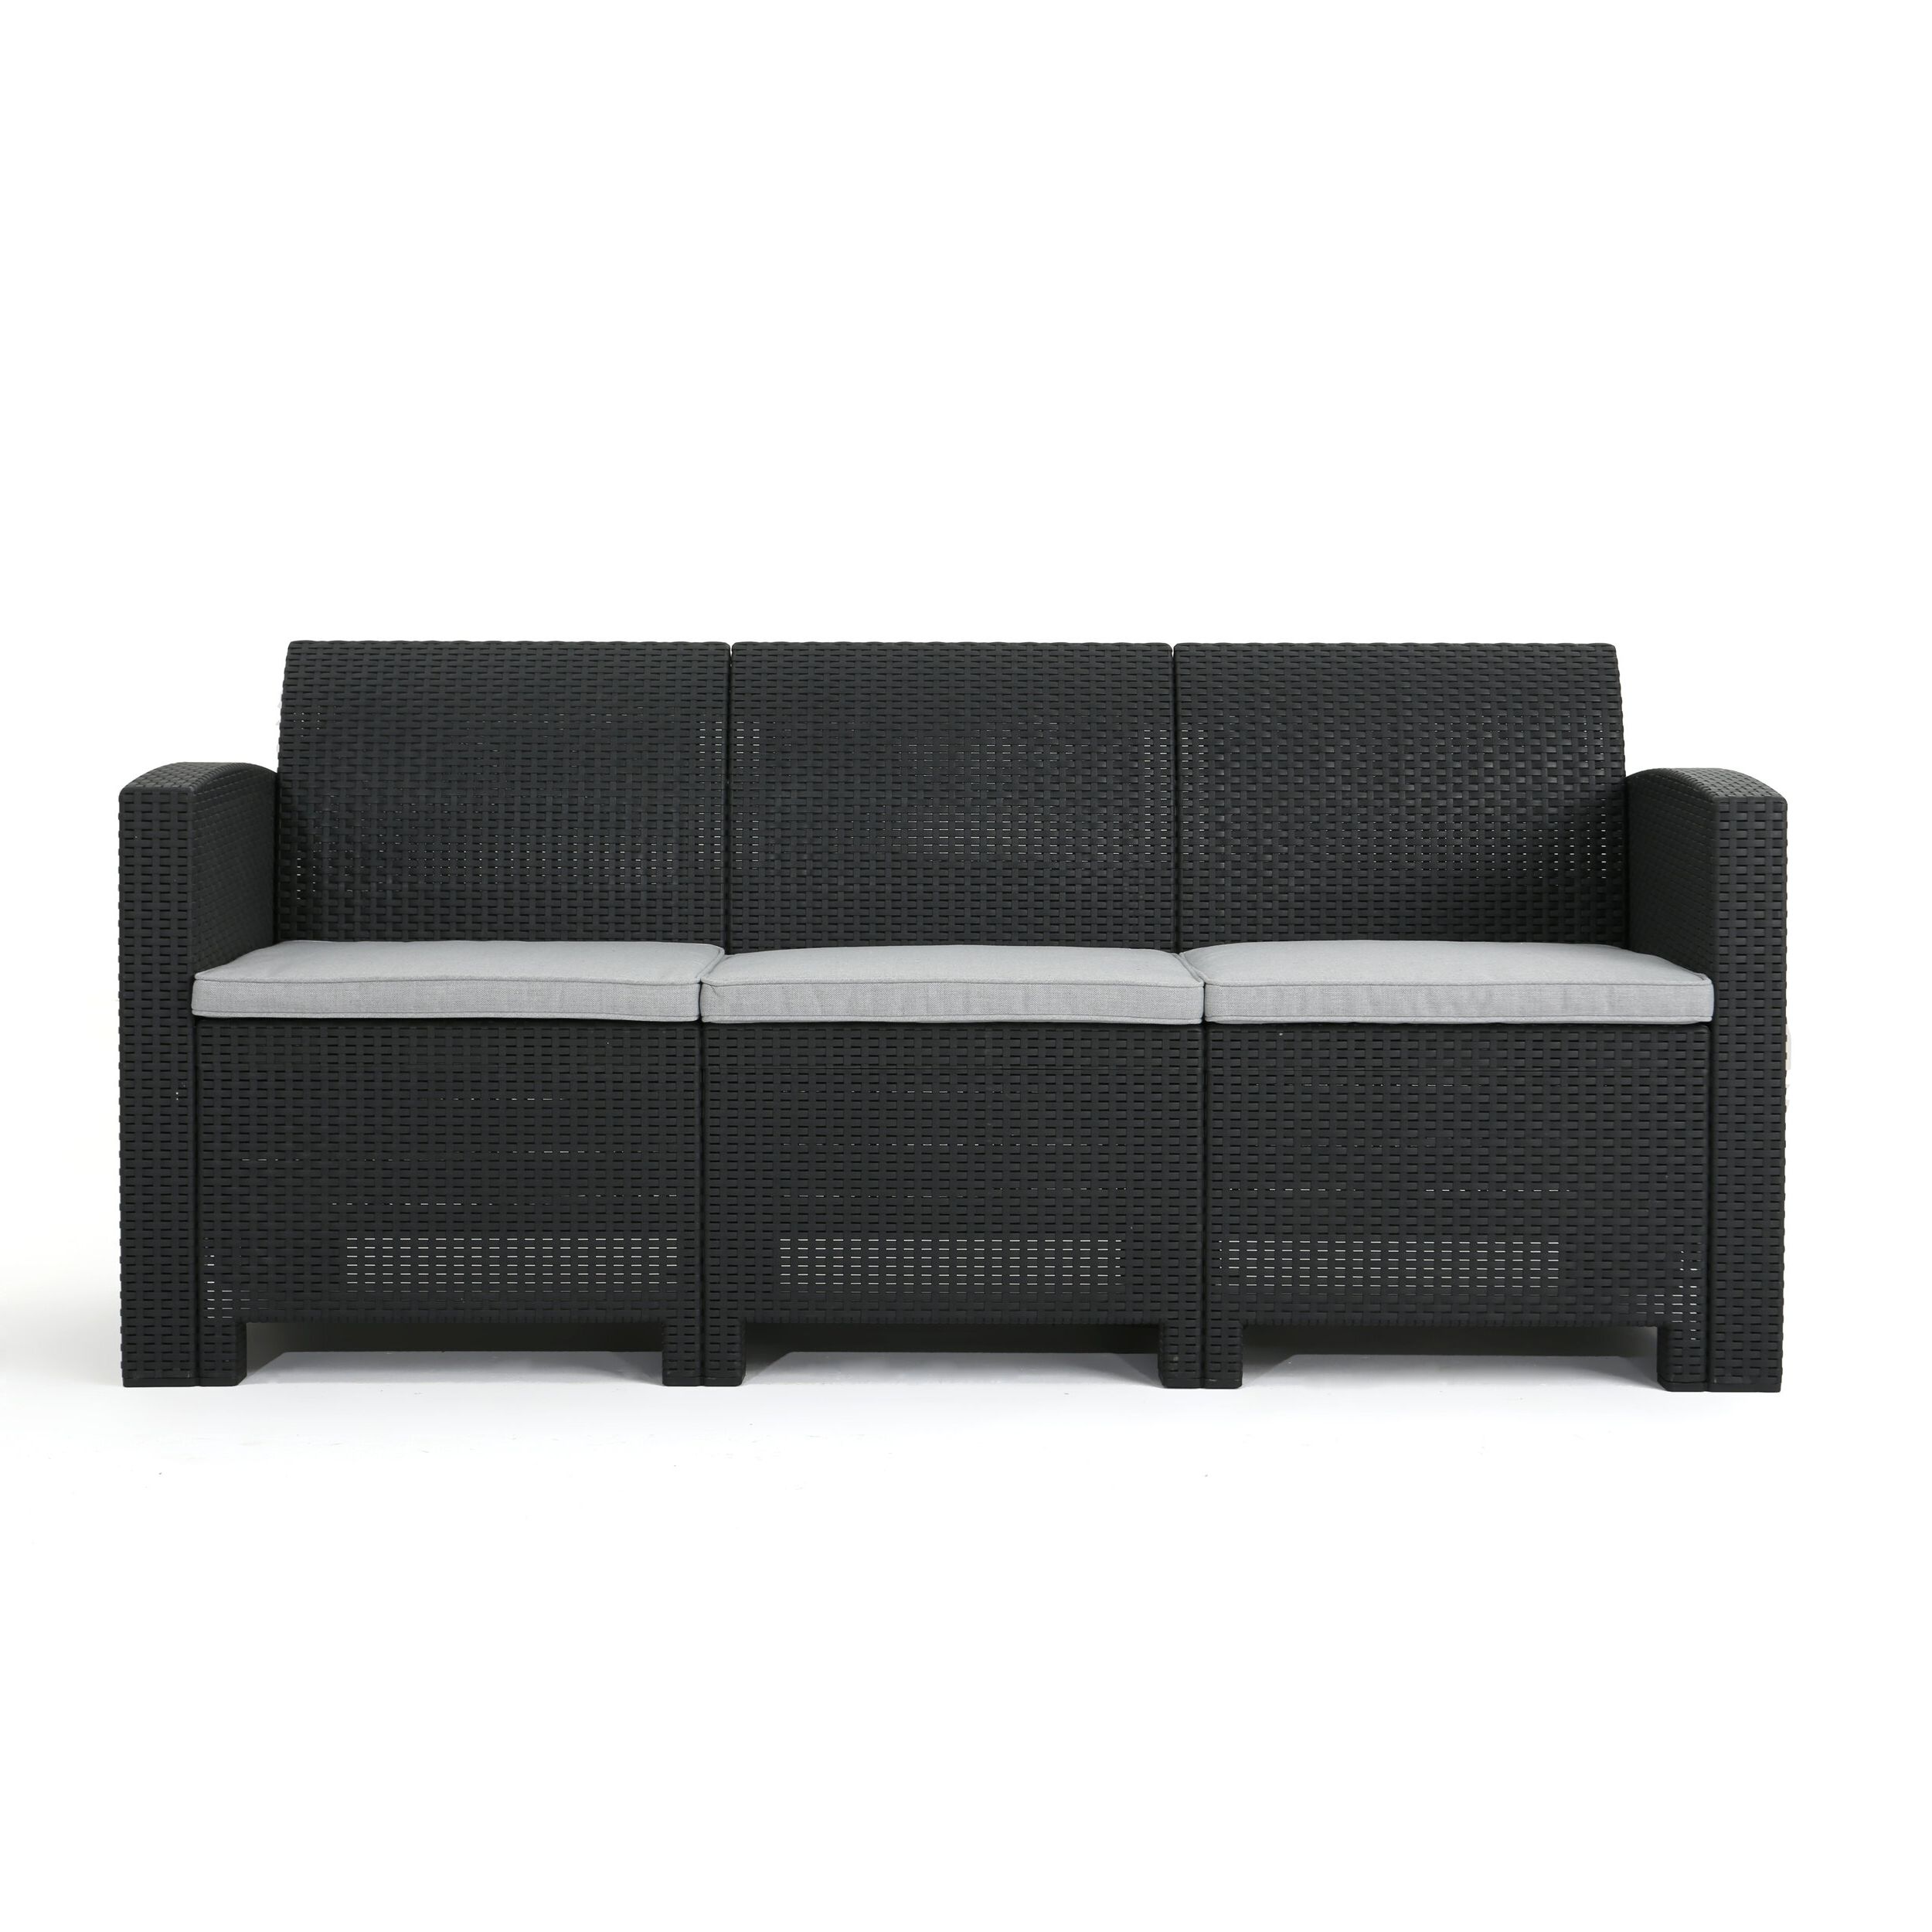 Yoselin Patio Sofa With Cushions Within Well Known Lobdell Patio Sofas With Cushions (View 25 of 25)